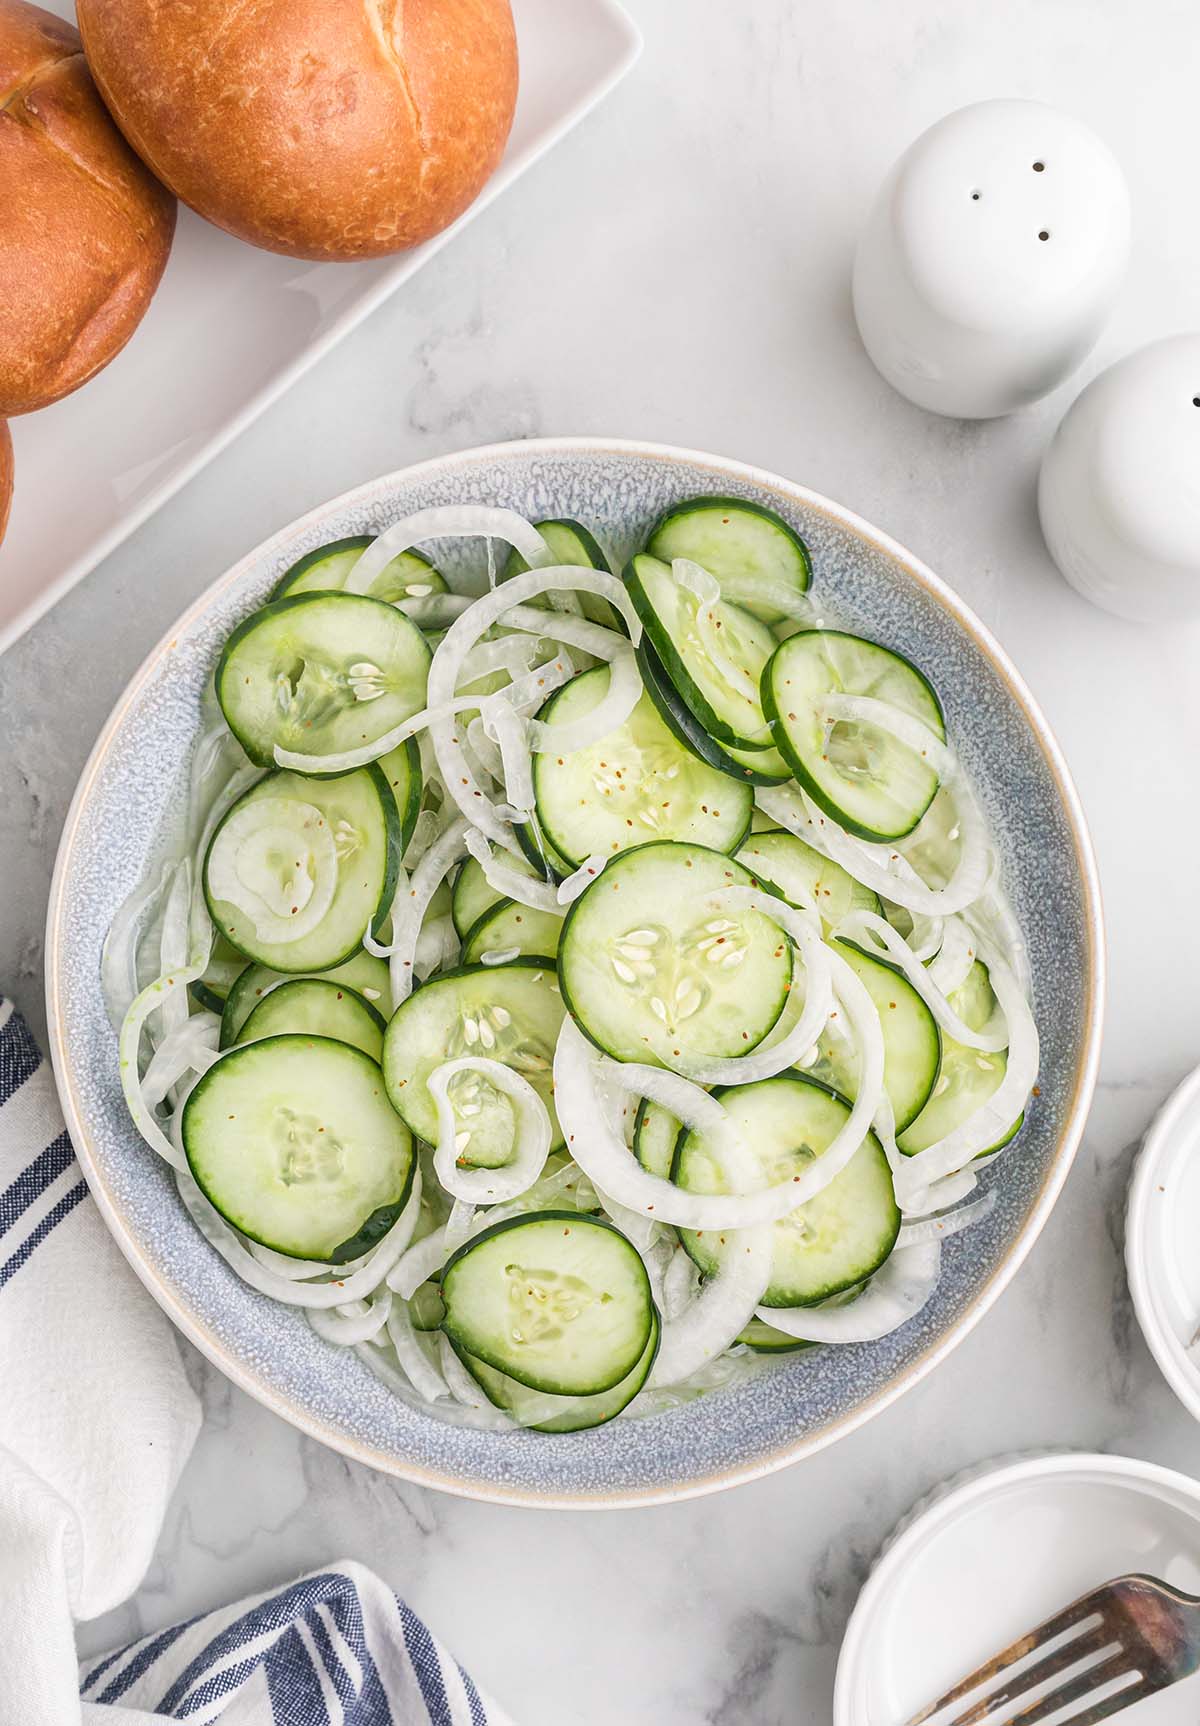 Overhead view of a bowl of cucumber salad.